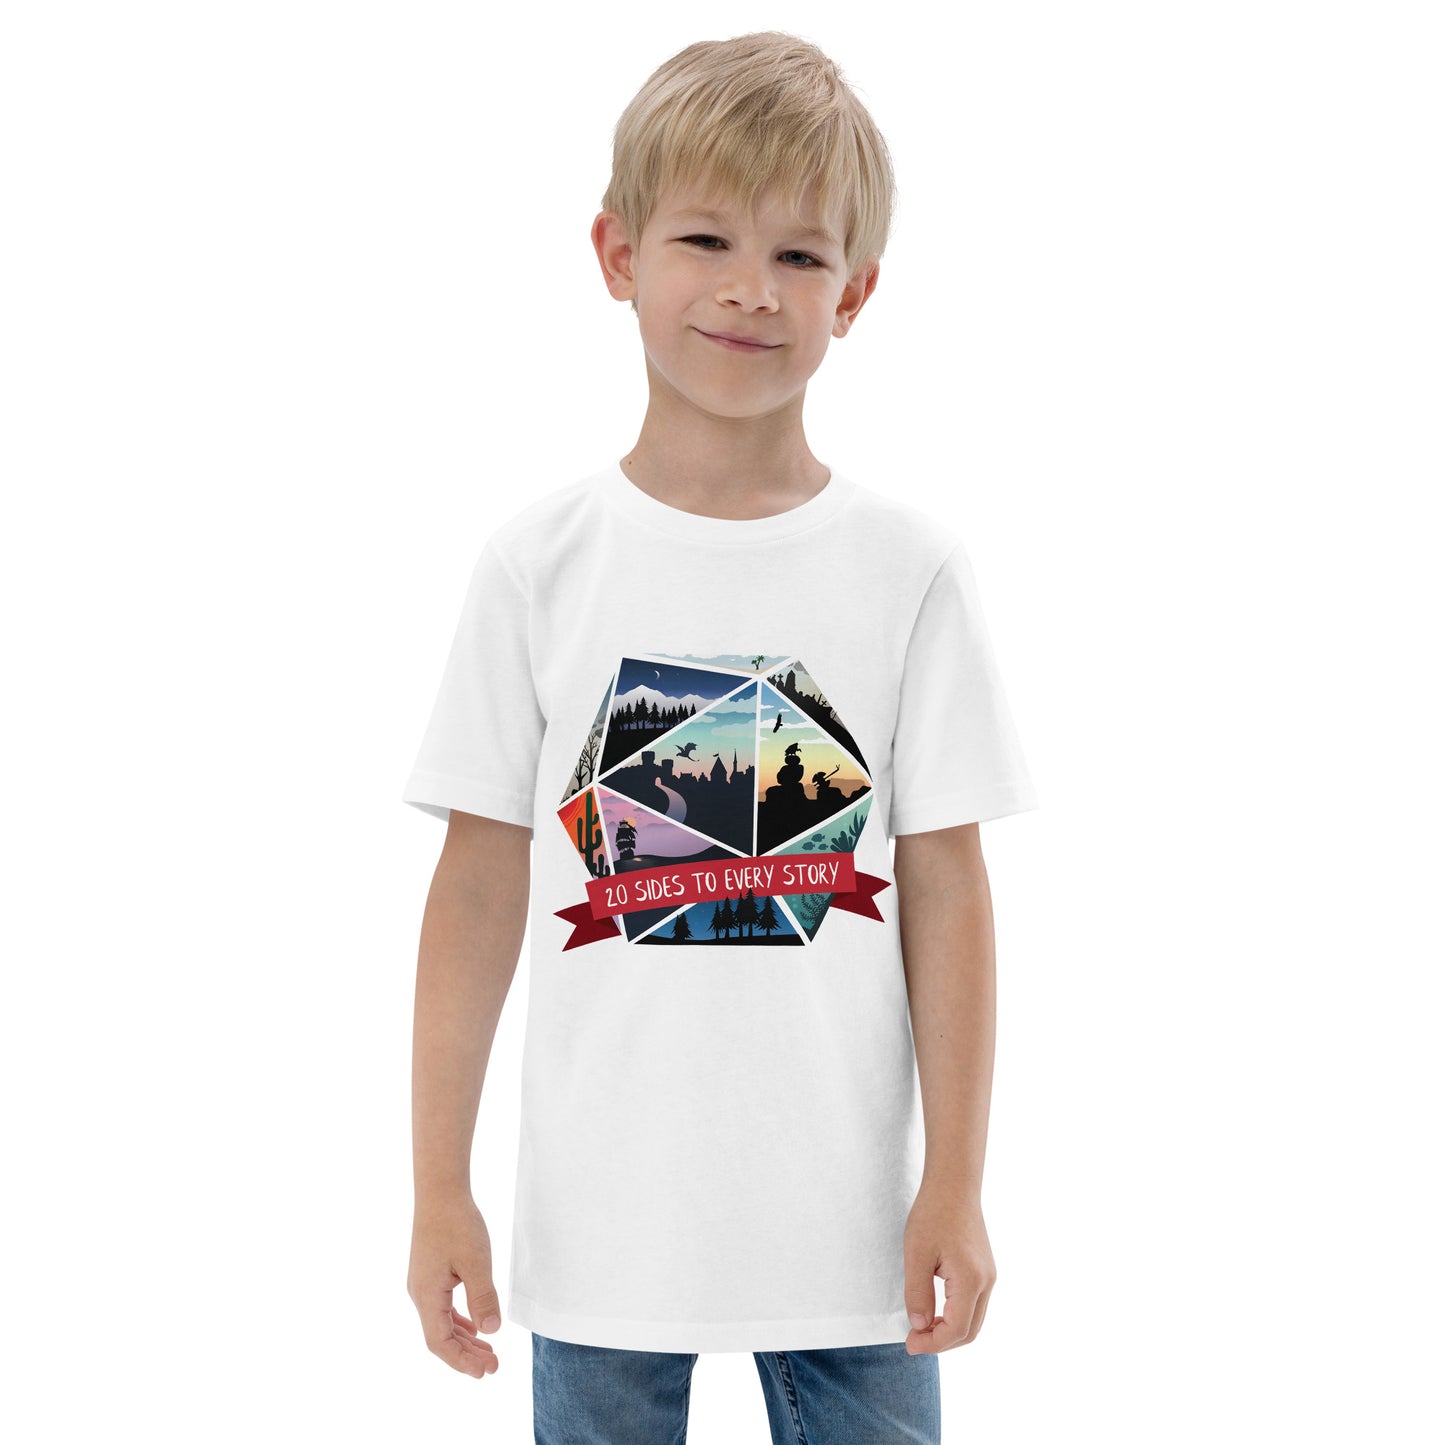 20 Sides to Every Story TTRPG Youth T-shirt  Level 1 Gamers White XS 